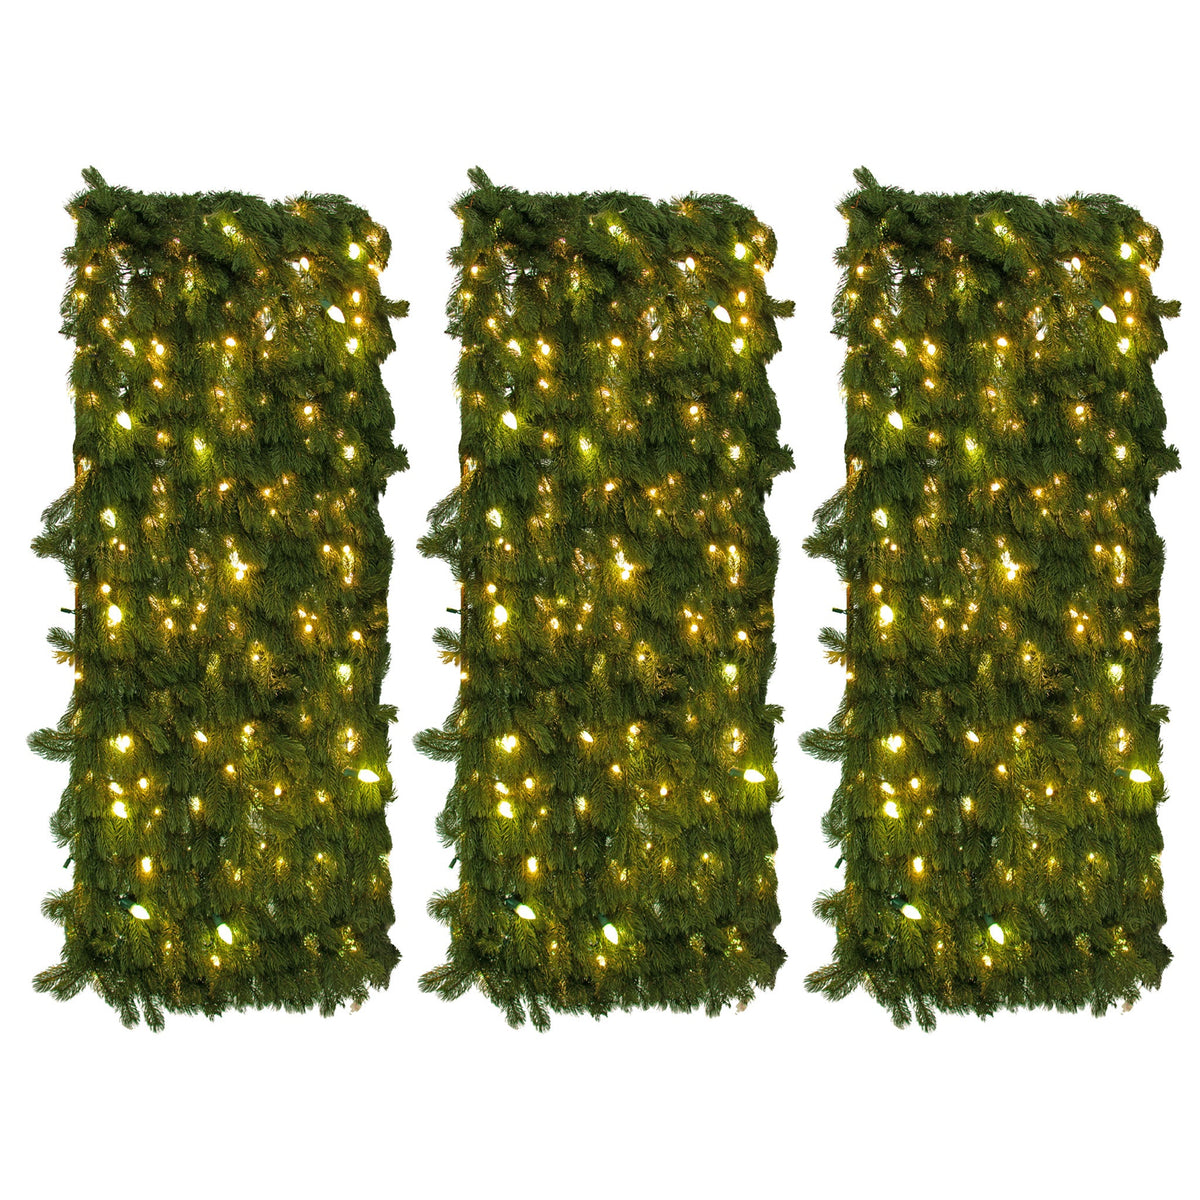 Artificial Greenery Wall Panels with LED Lights